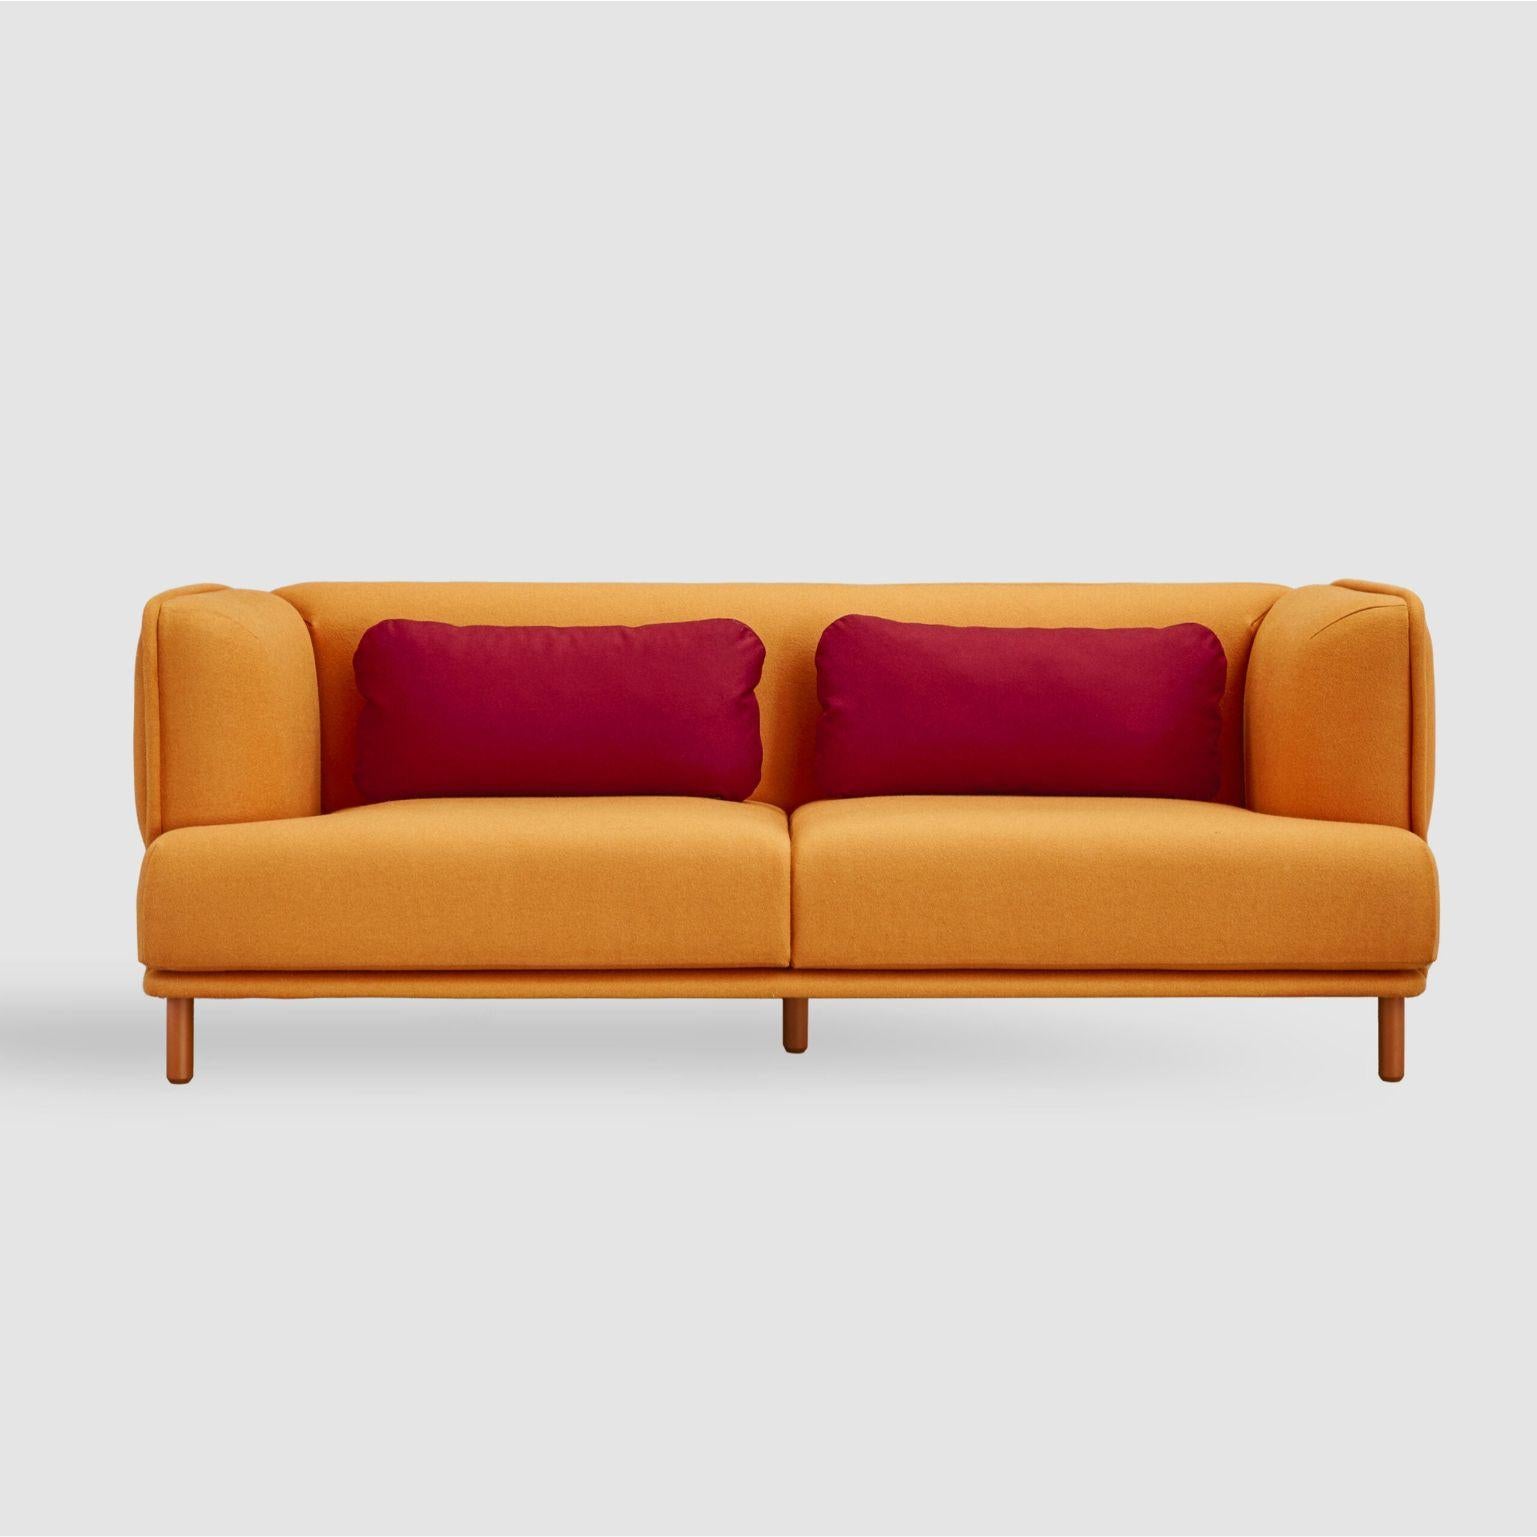 Hug sofa, maxi by Pepe Albargues
Dimensions: W226, D95, H73, Seat43
Materials: Pine wood structure reinforced with plywood and tablex
Backrest is 50% goose feather and 50% polyester fibre
Foam CMHR (high resilience and flame retardant) for all